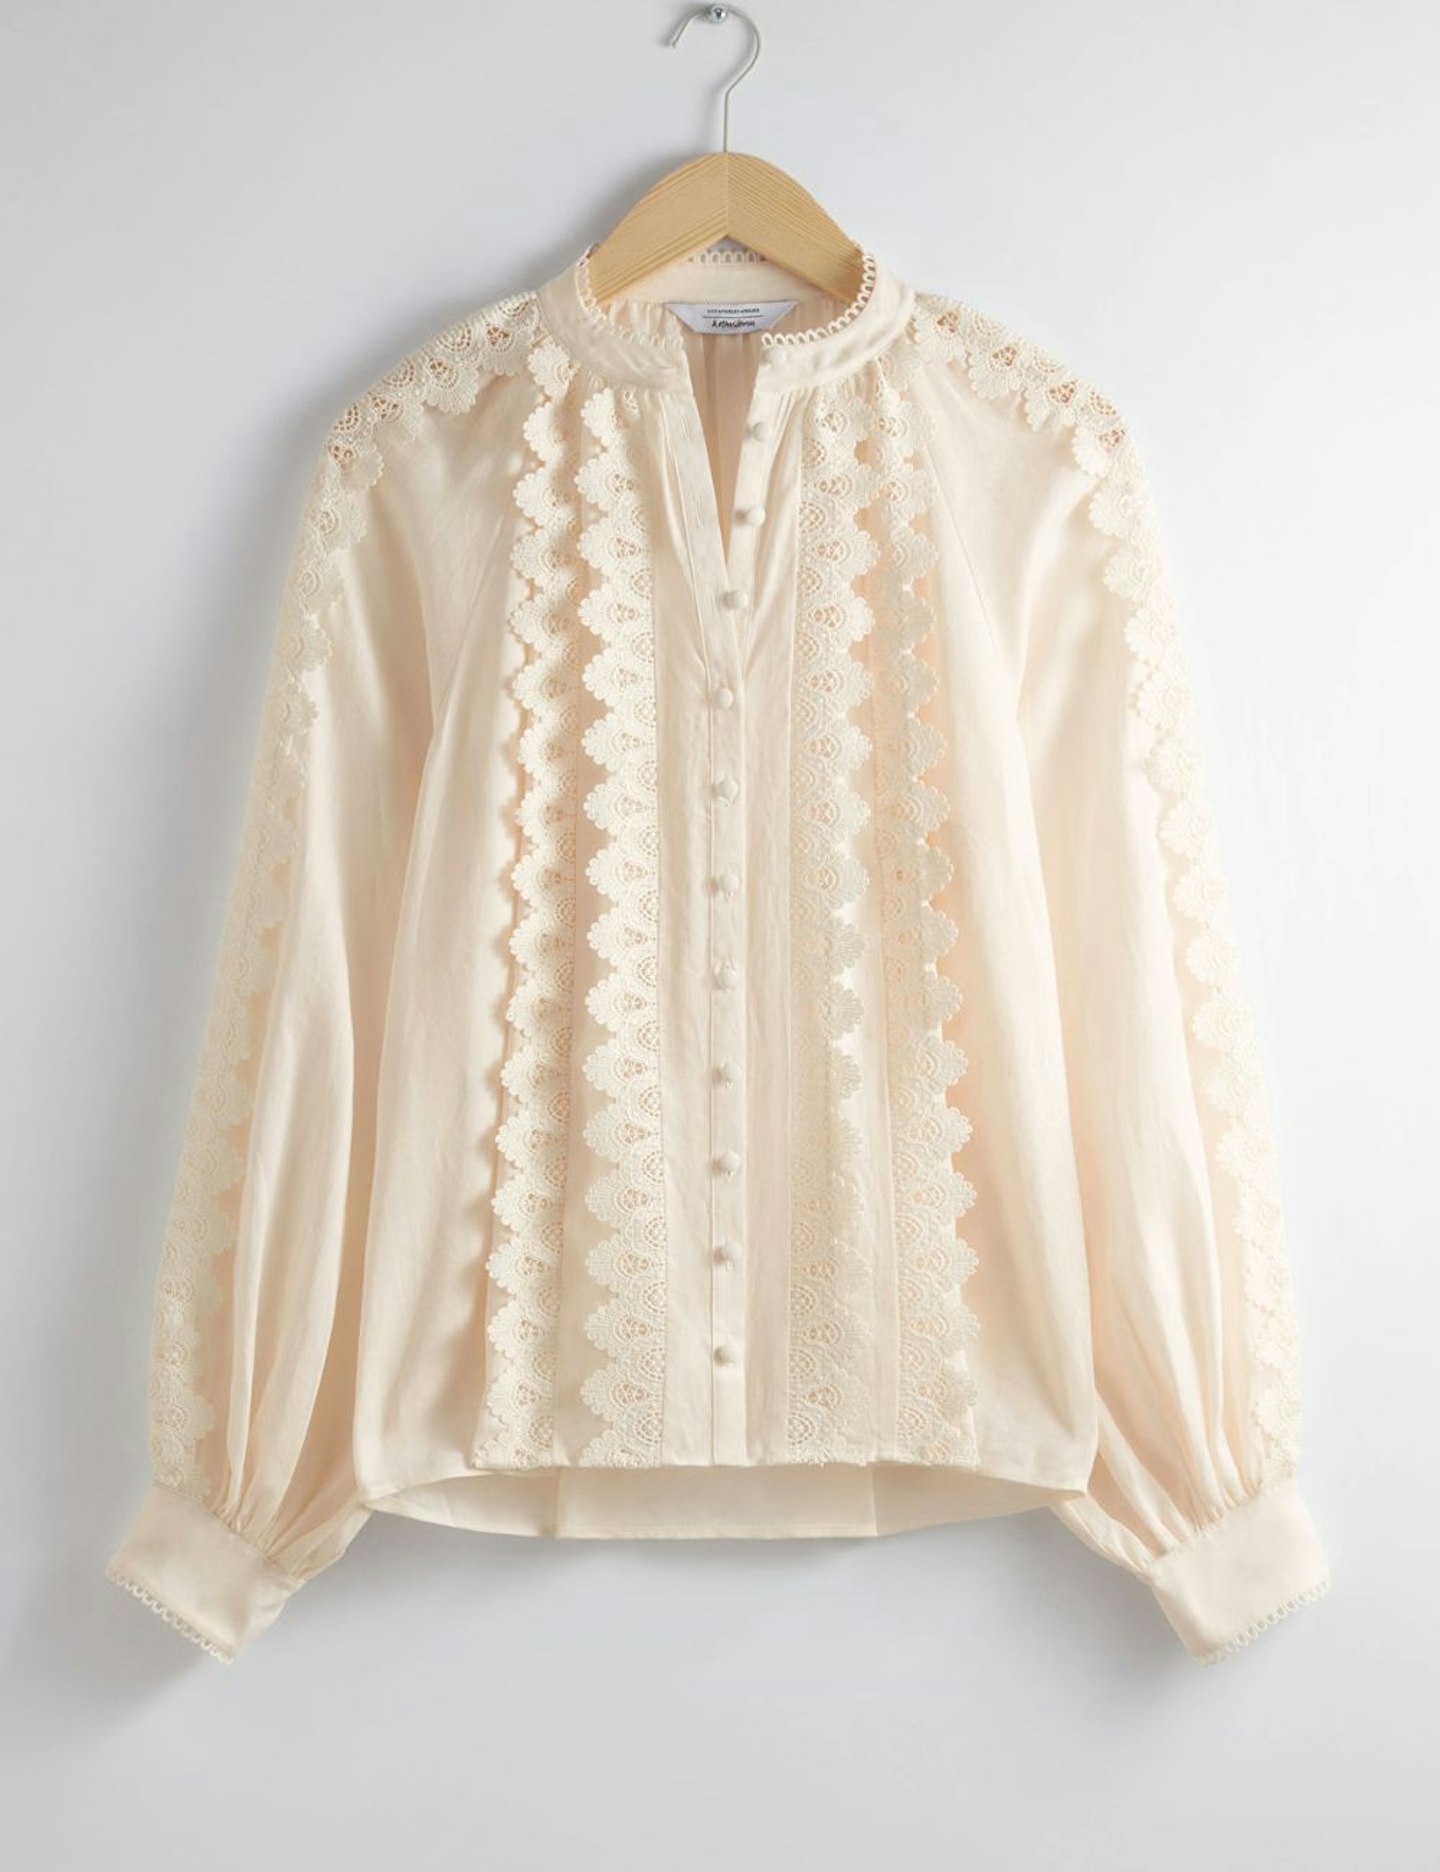 & Other Stories, Scalloped Lace Blouse